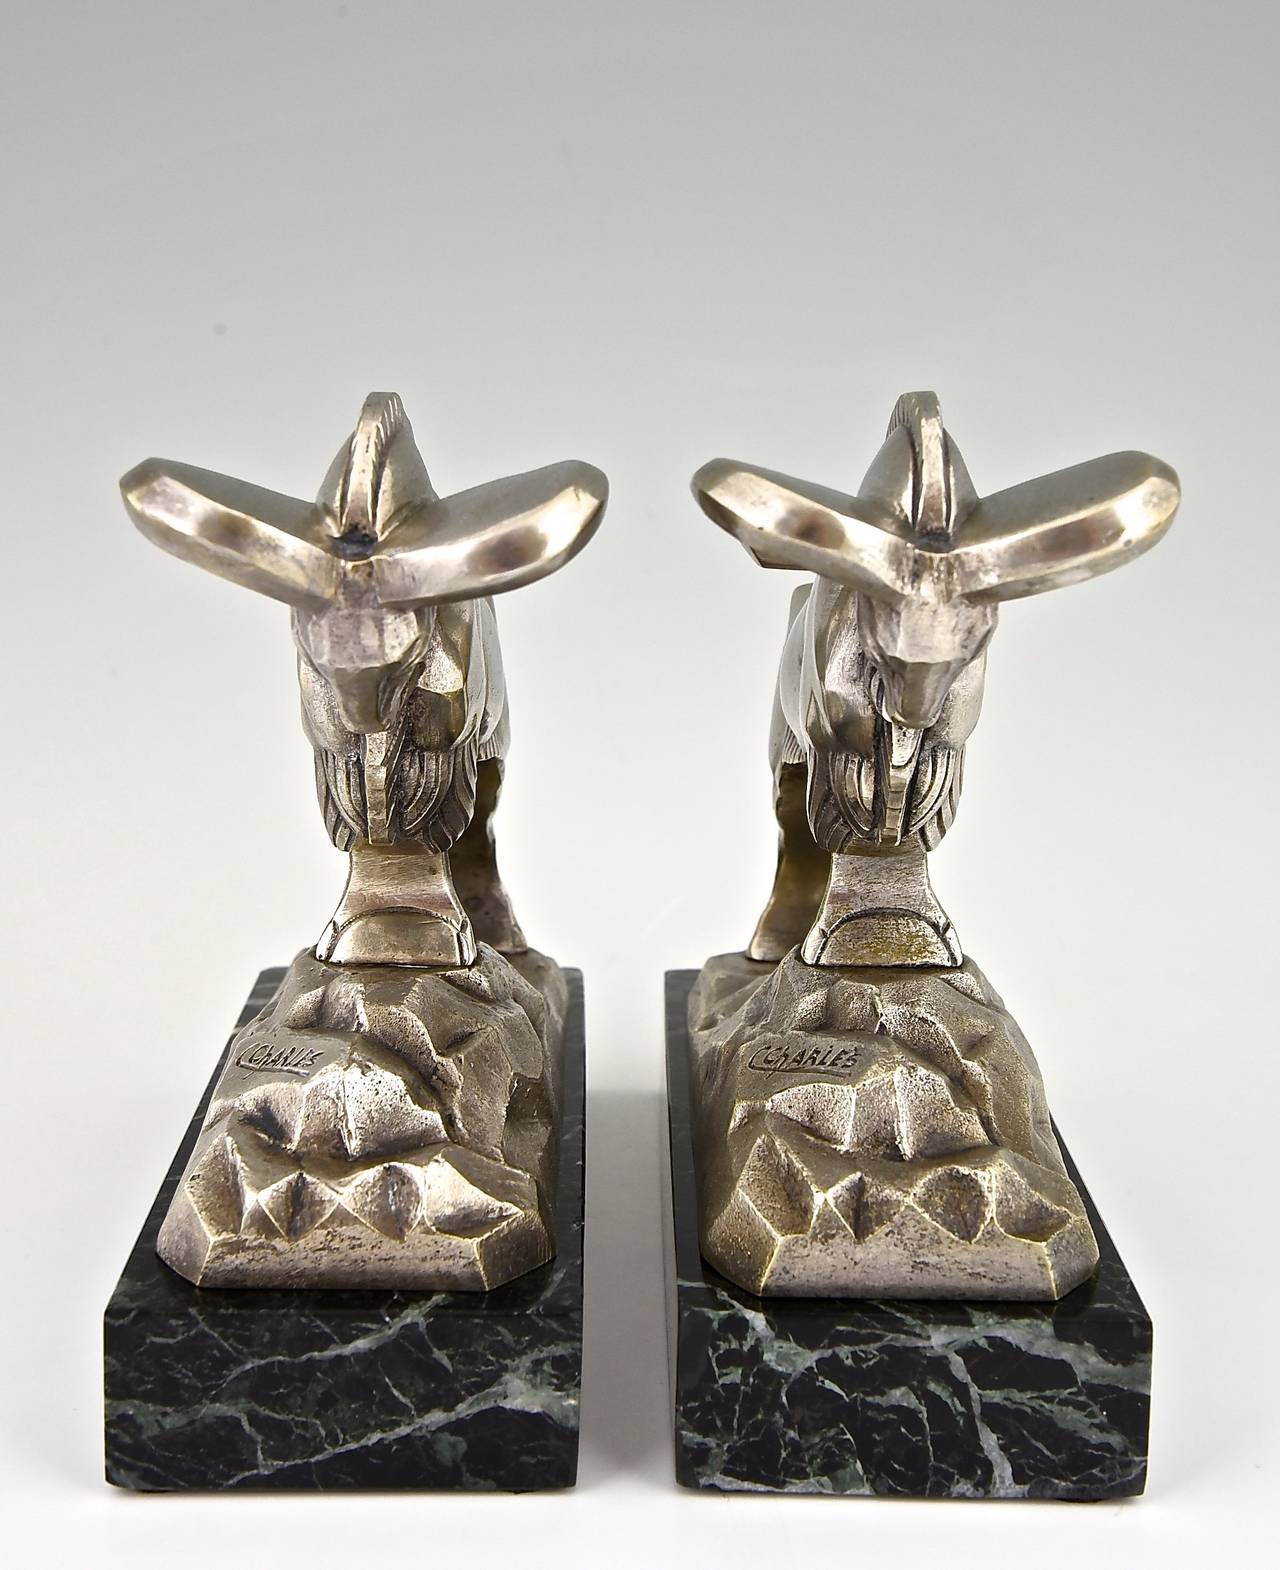 Silvered French Art Deco Bronze Ibex or Ram Sculpture Bookends by C. Charles, 1930